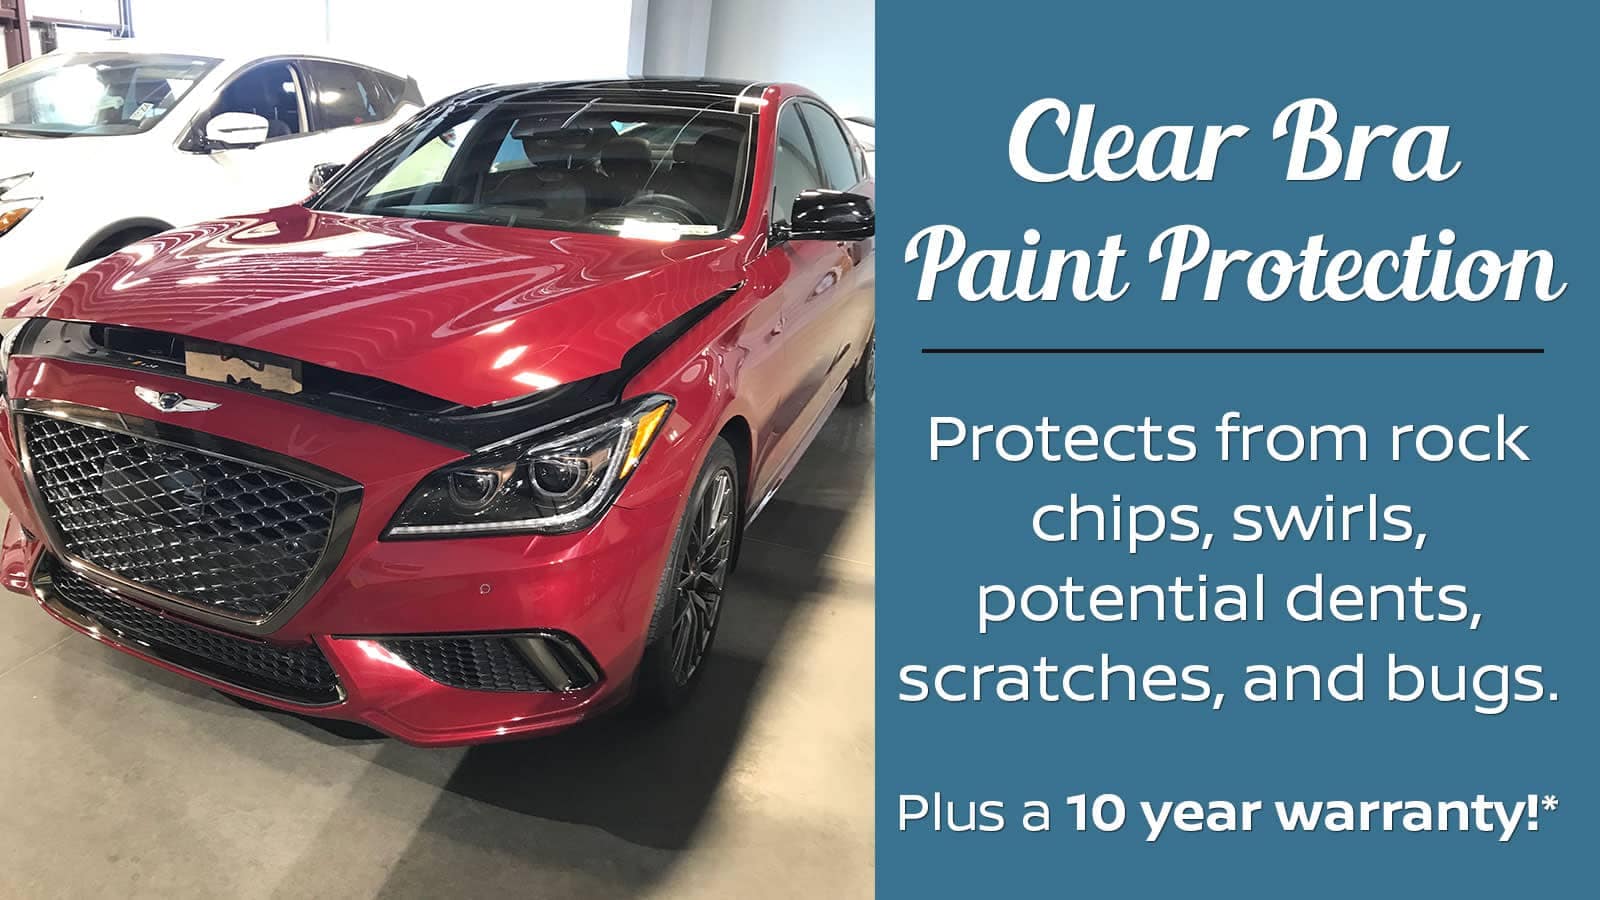 Clear Bra Paint Protection